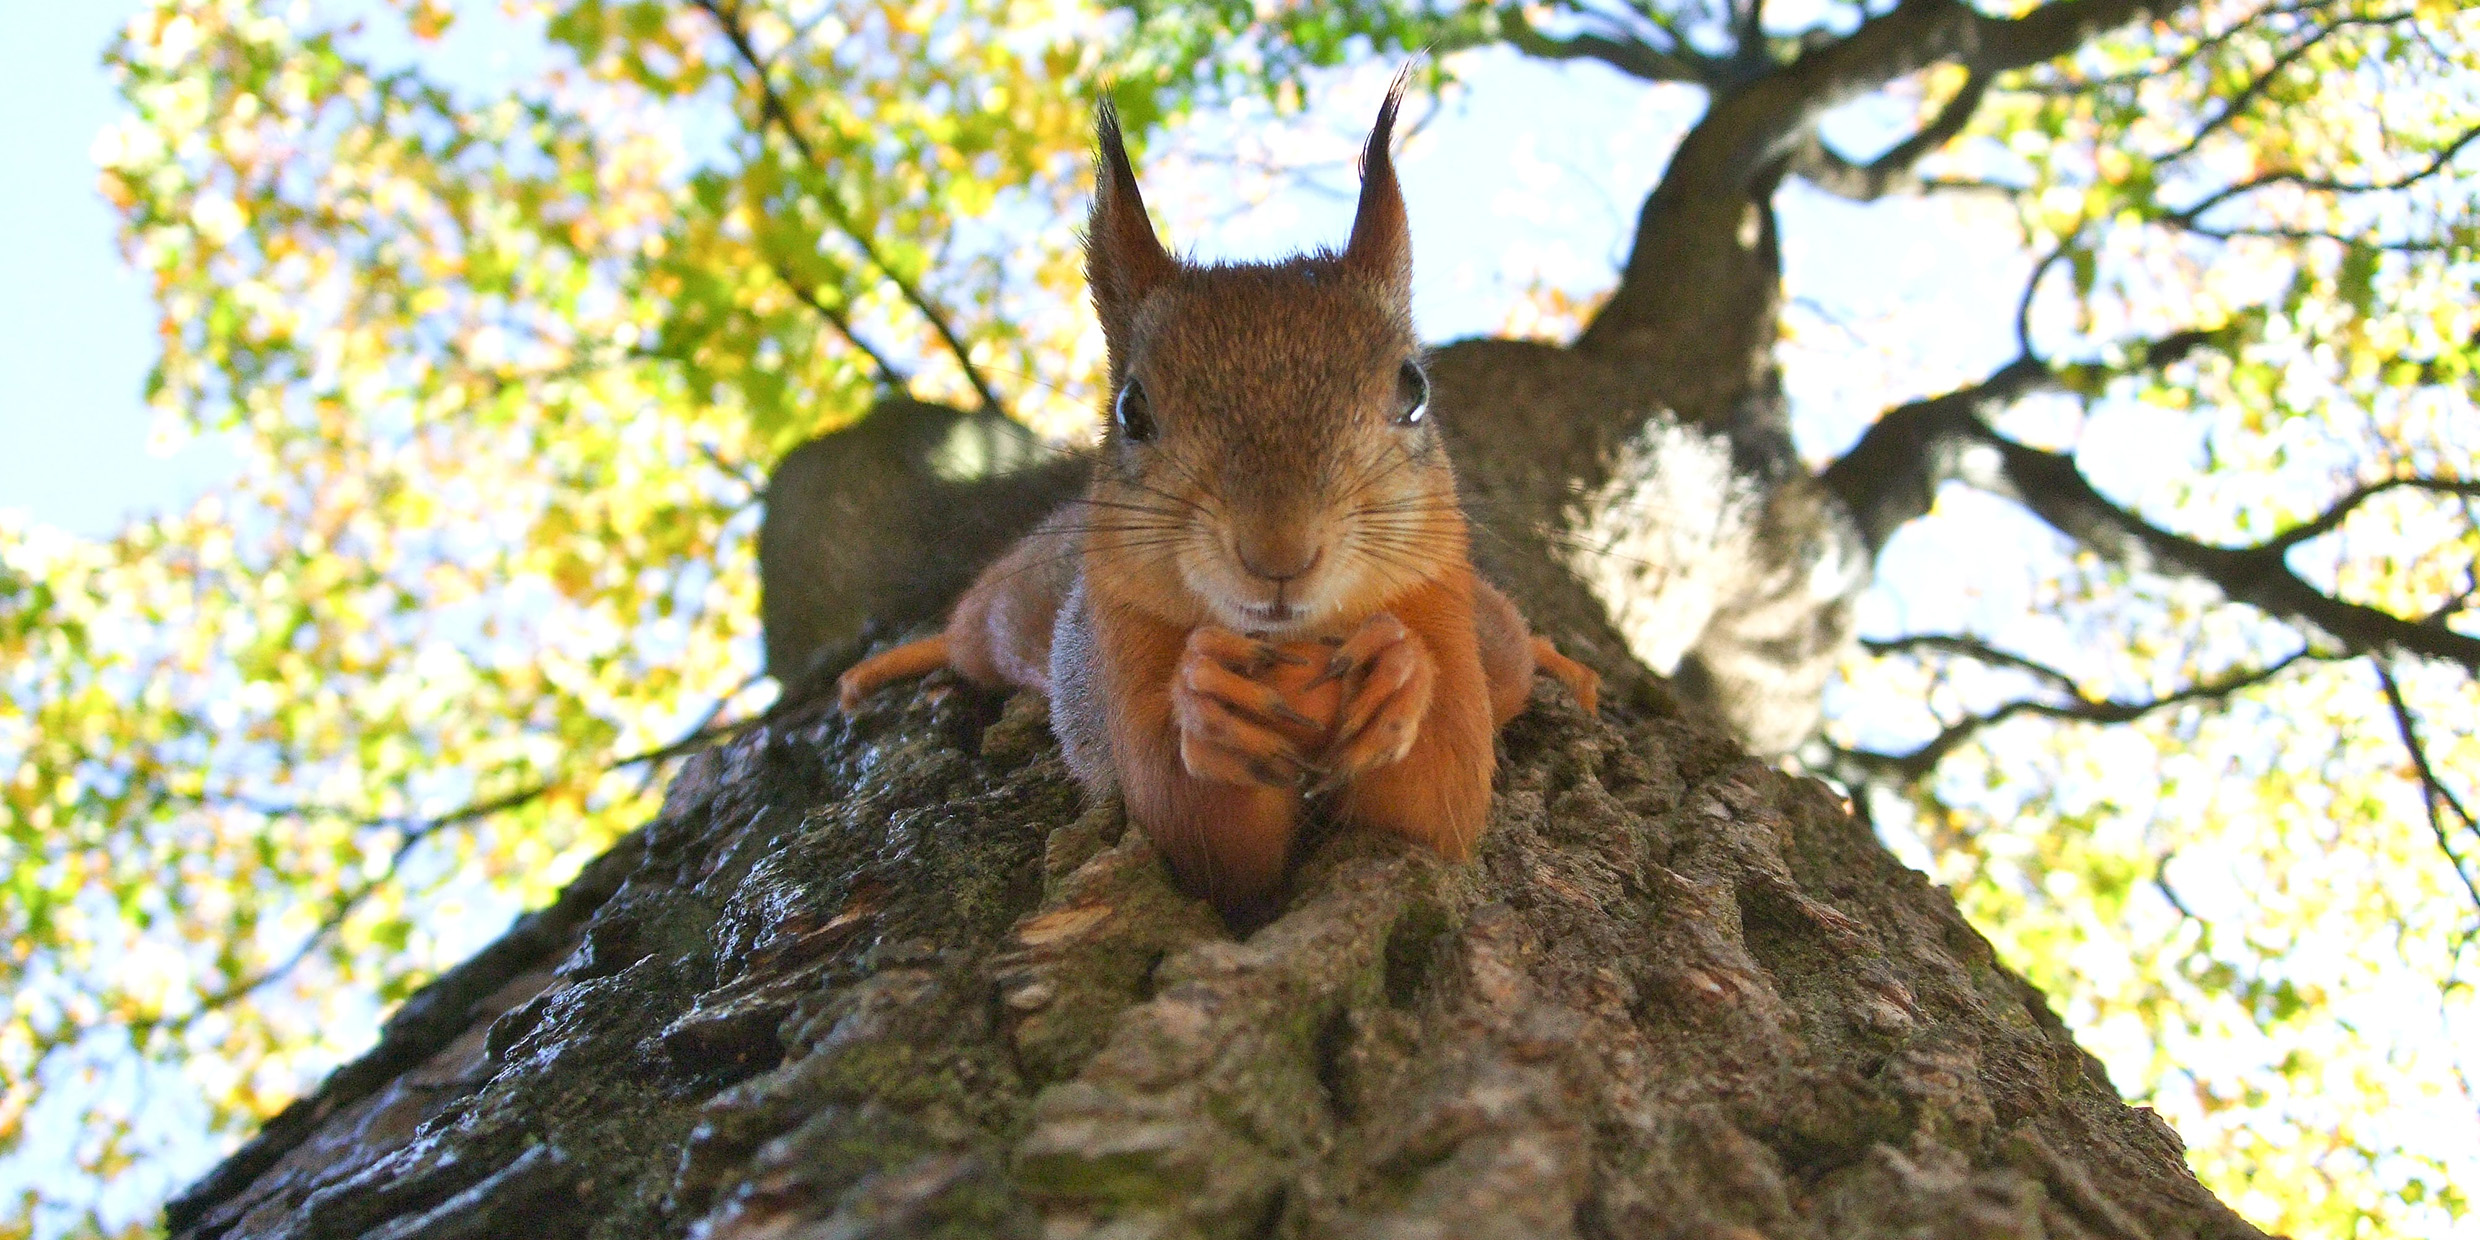 Image of squirrel in tree